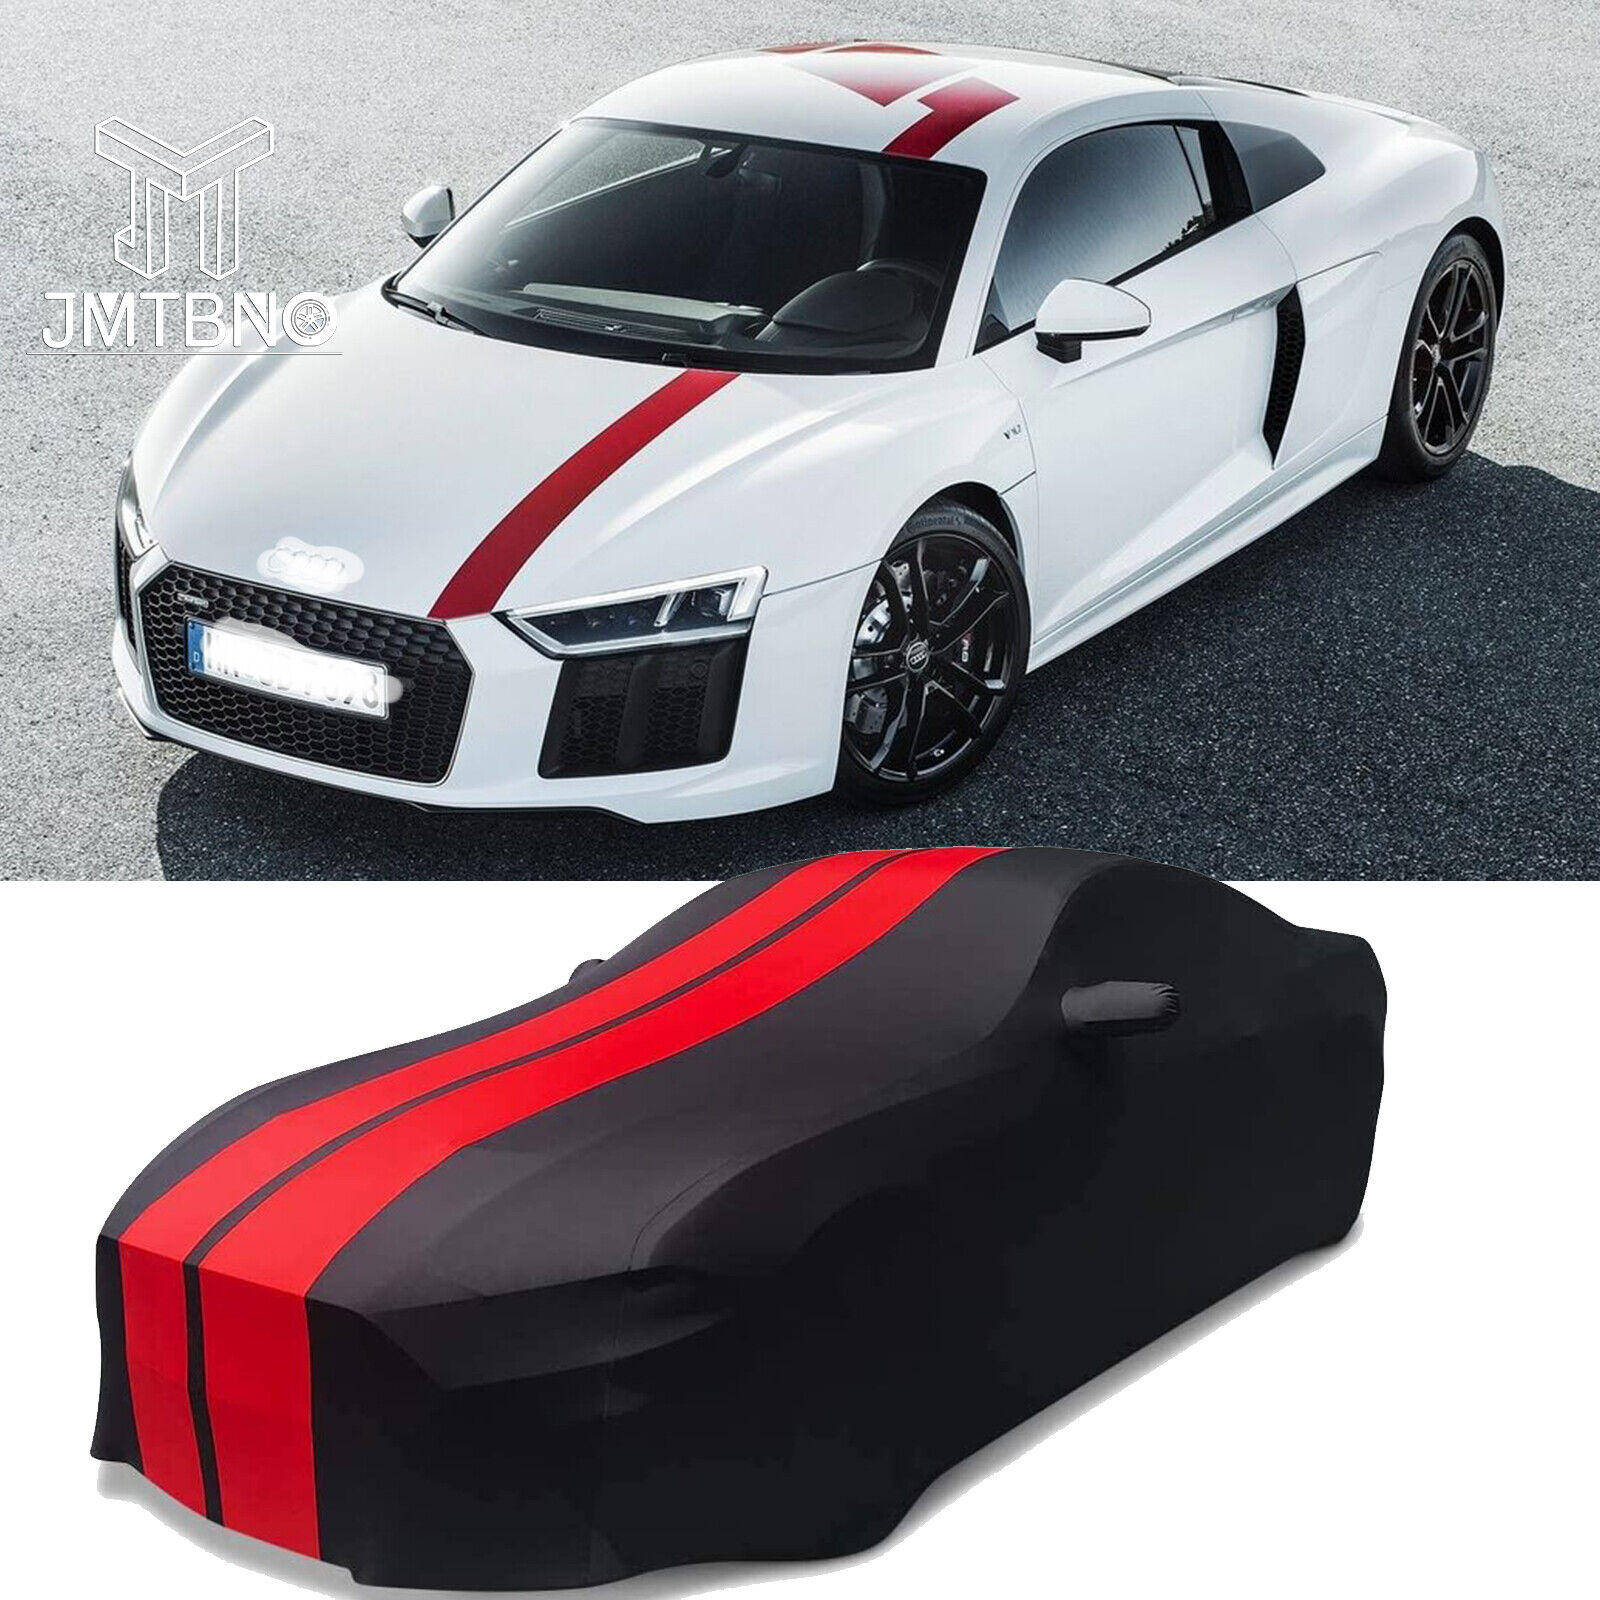 Satin Stretch Indoor Full Car Cover Scratch Dustproof Protect For Audi R8 Spyder